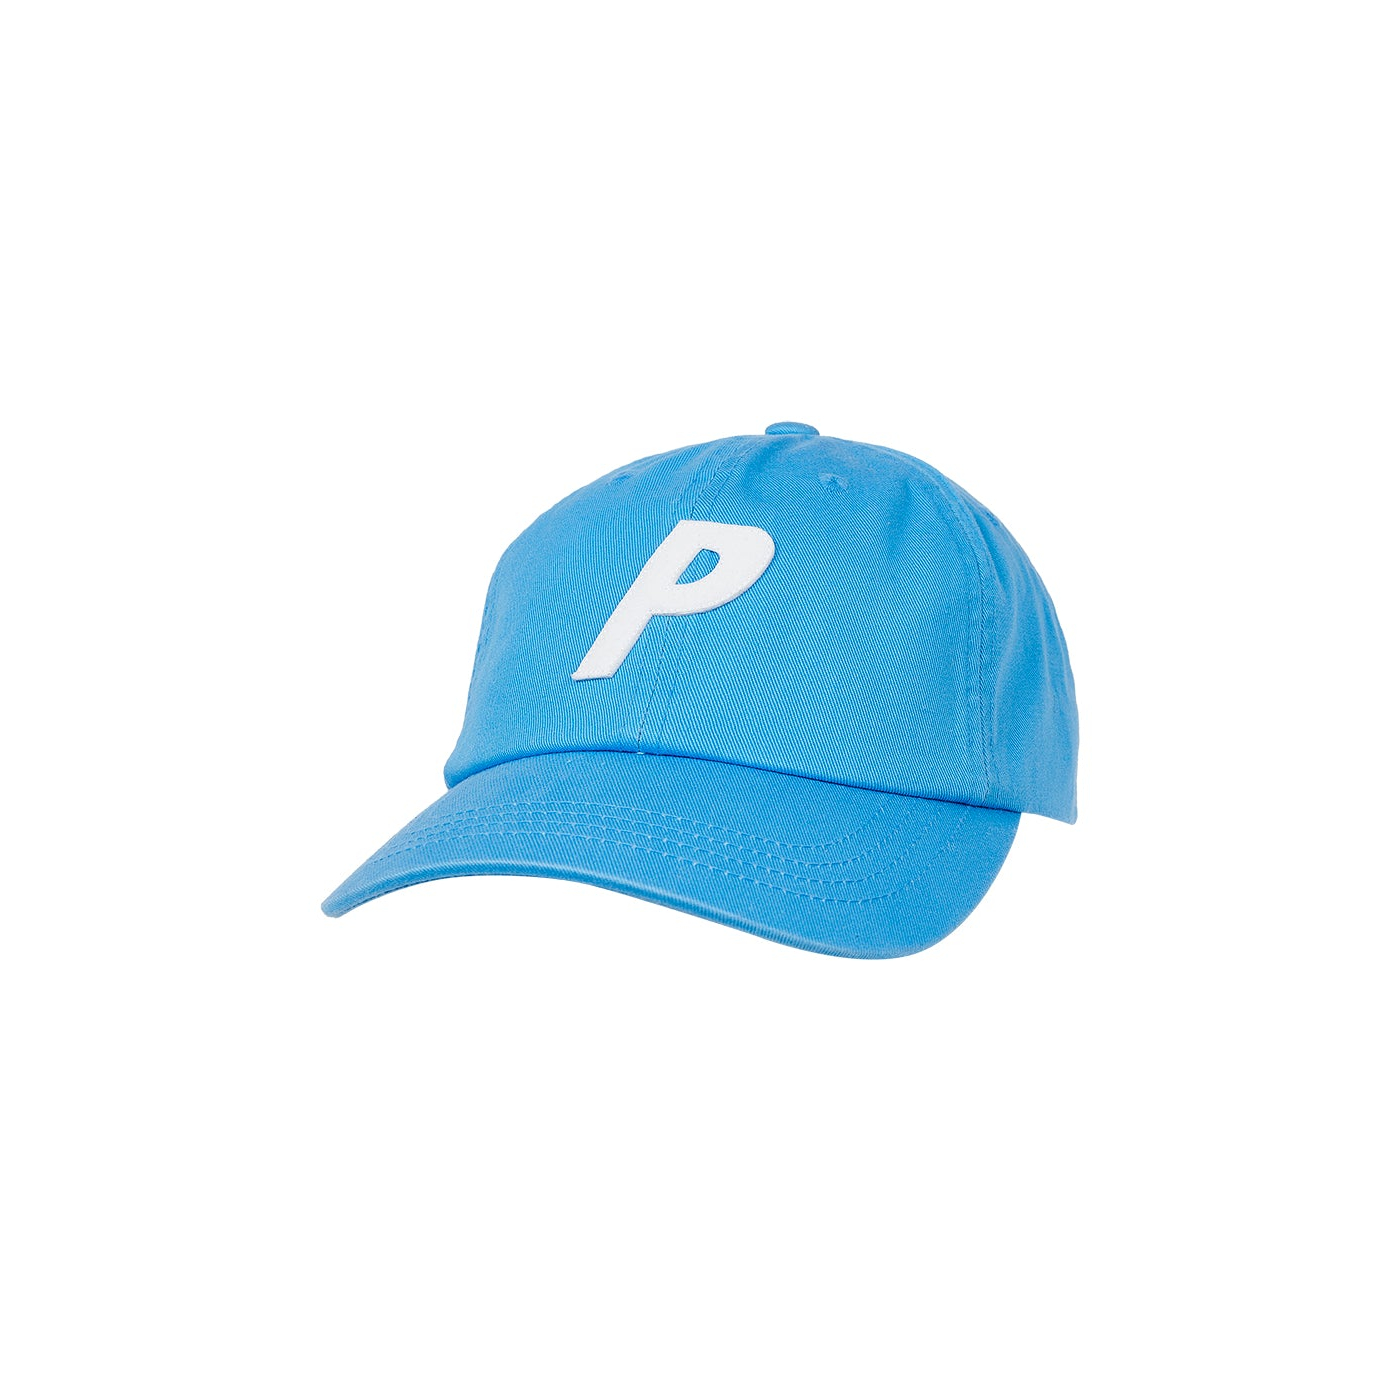 Thumbnail P 6-PANEL CRYSTALISED BLUE one color